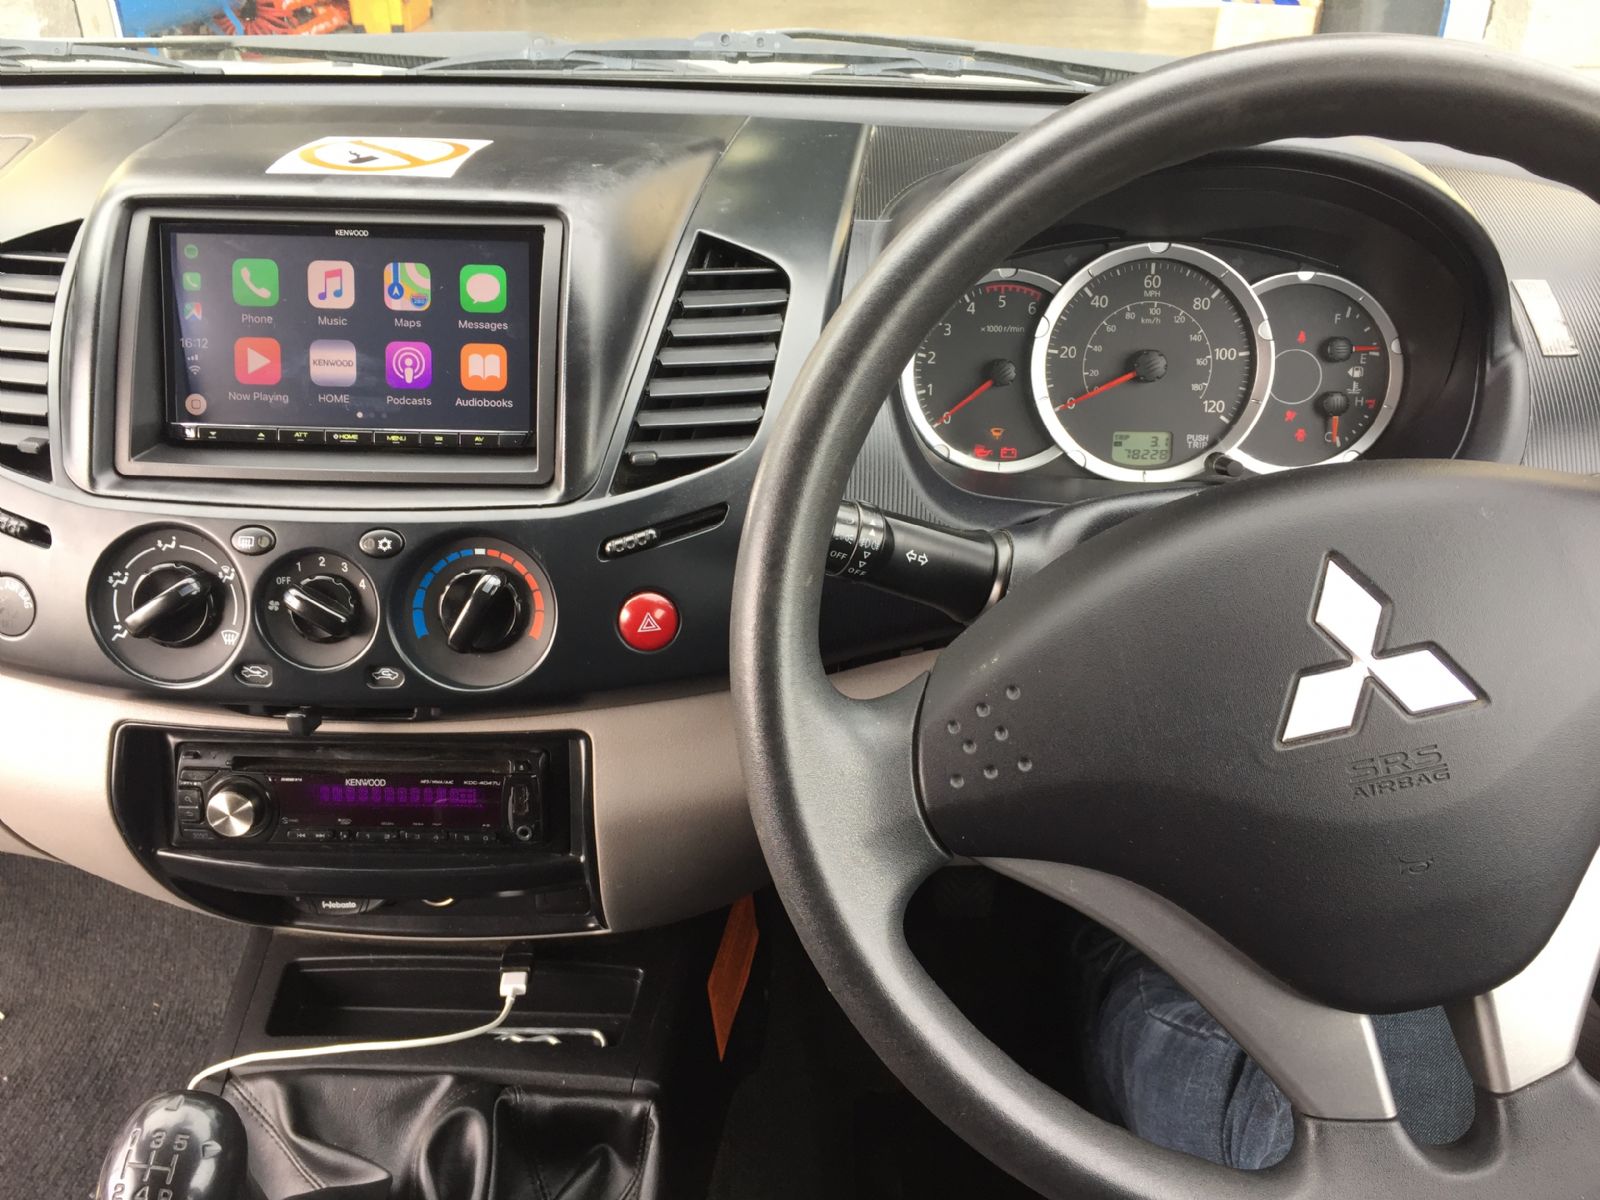 Mitsubishi L200 fitted with Kenwood Apple Carplay